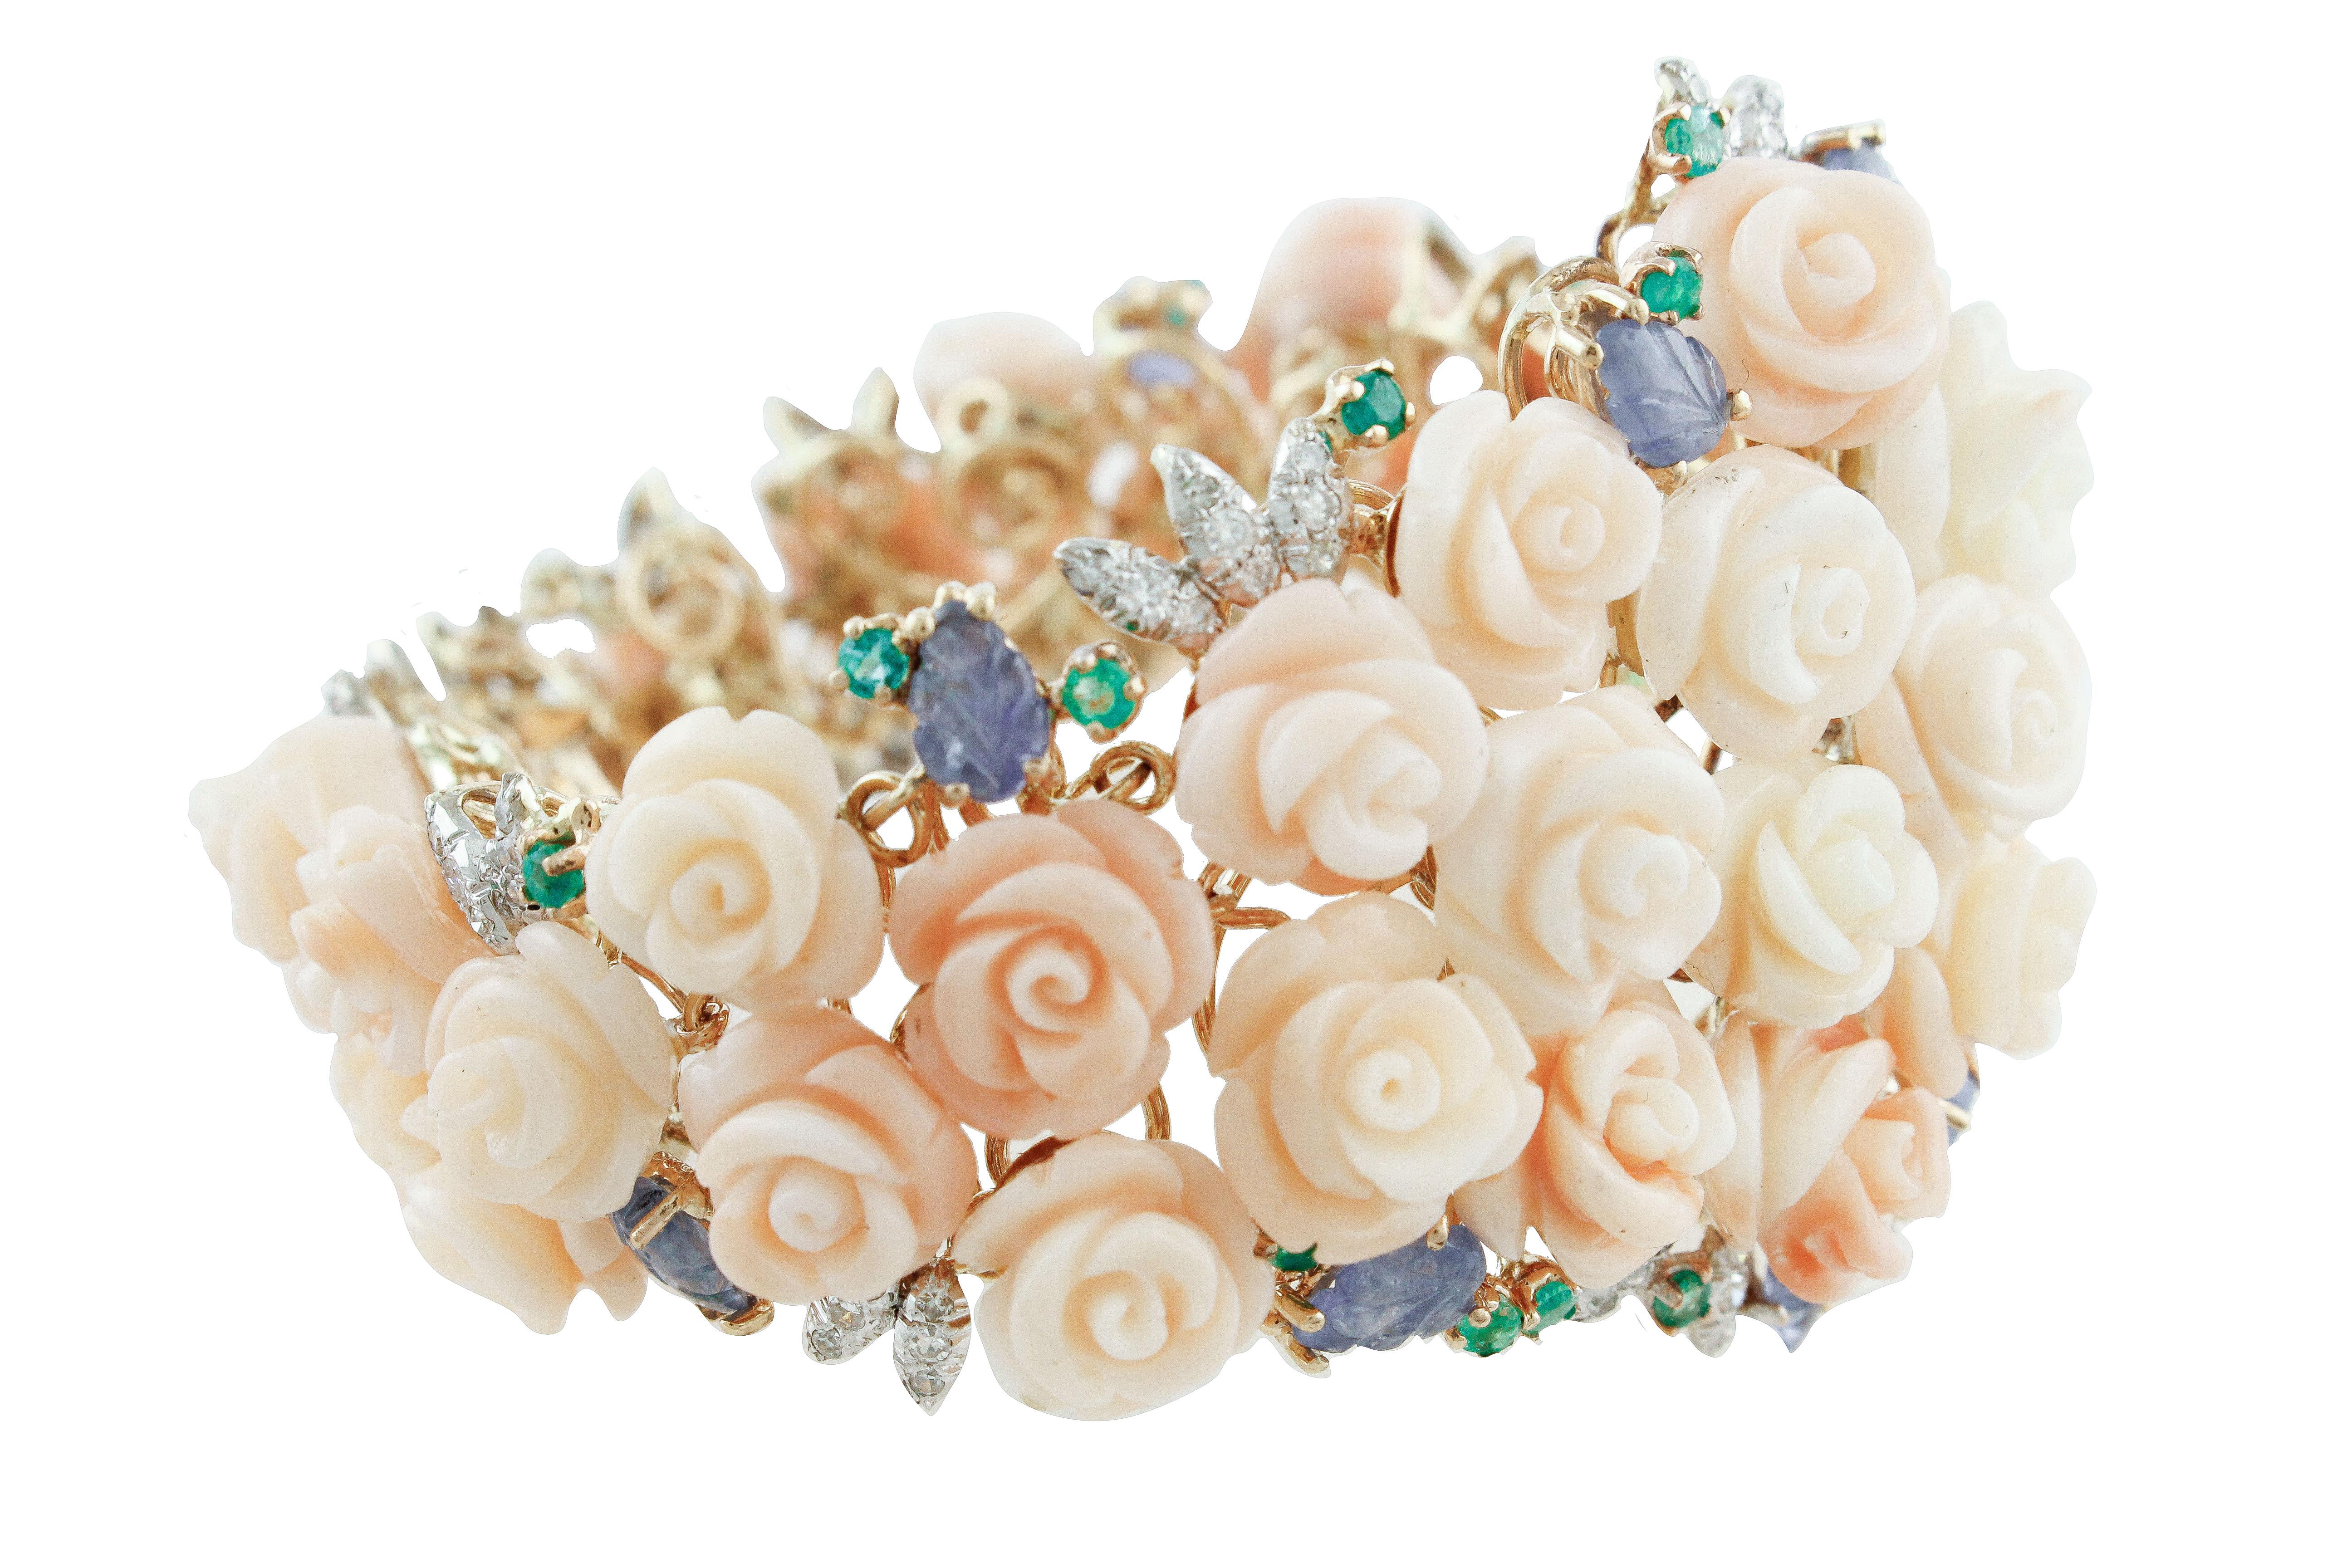 Refine and elegant 14K rose gold semi-rigid bracelet composed of light pink coral flowers, 14K white gold leaves detailes studded by diamonds, blue sapphires leaves and emeralds
Diamonds 1.61 ct 
Blue Sapphires, Emeralds 10.81 ct 
Pink Coral Flowers